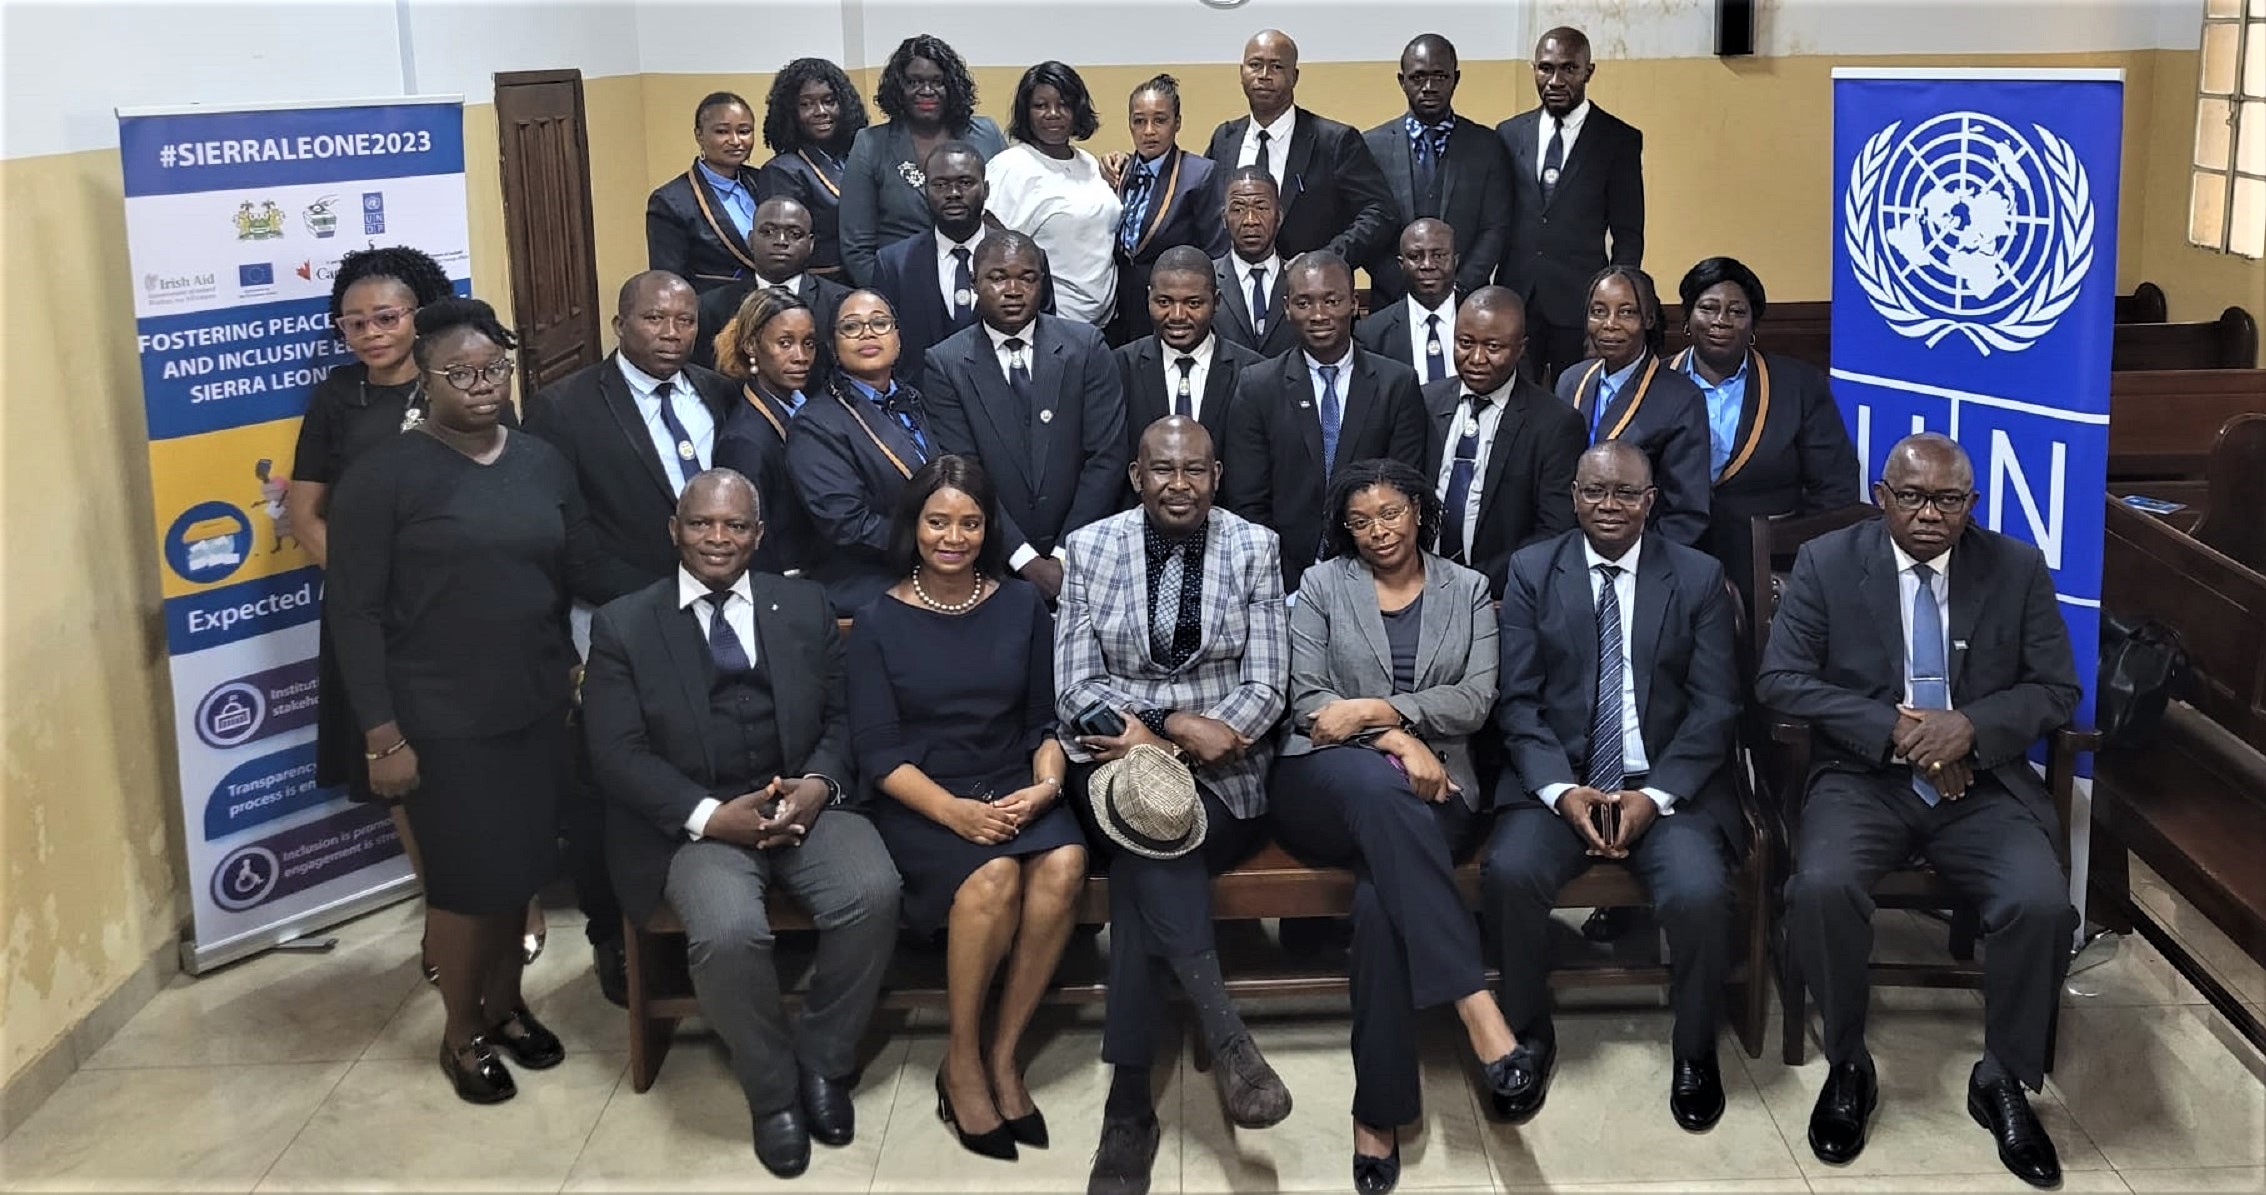 Seated on the front row : The Honorable Chief Justice Desmond Babatunde Edwards(3rd from the left) attends the training of Court Registrars on 9 June